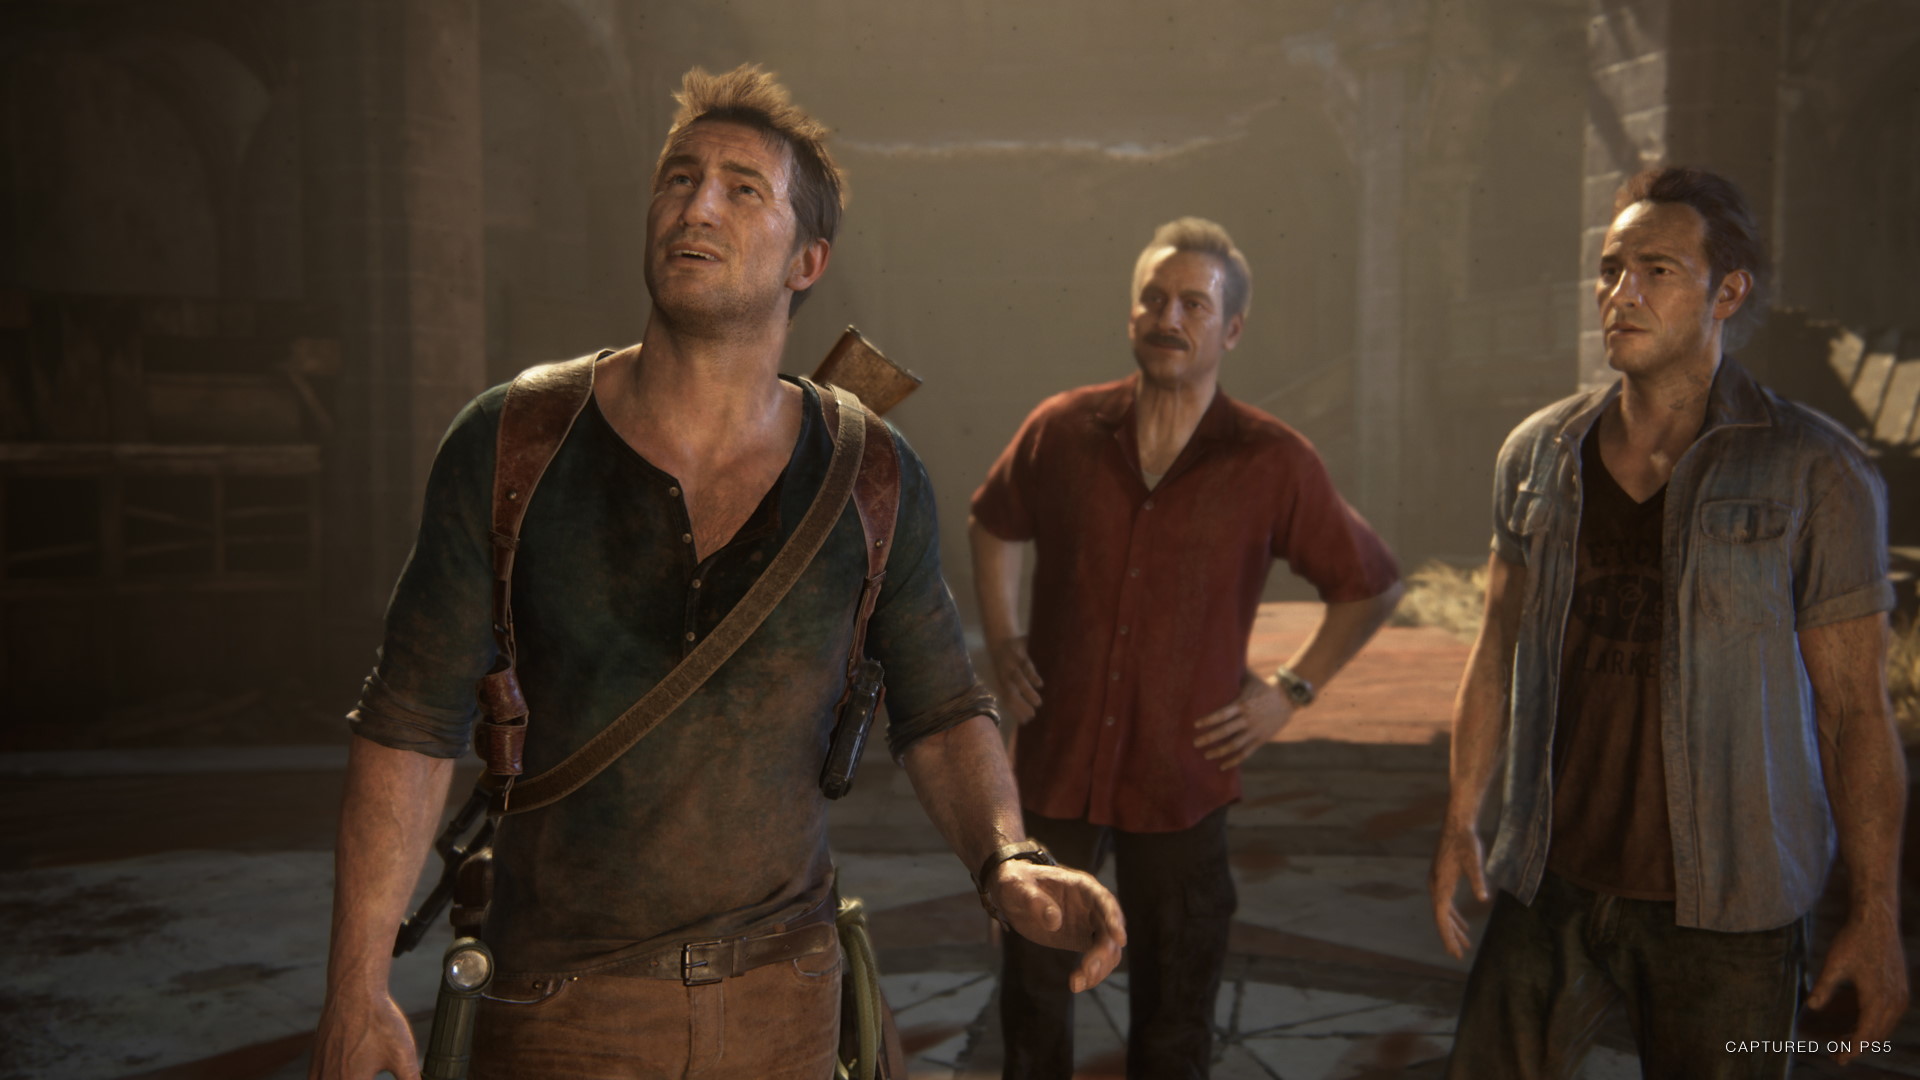 Naughty Dog to continue developing games for PC, as well as PS5